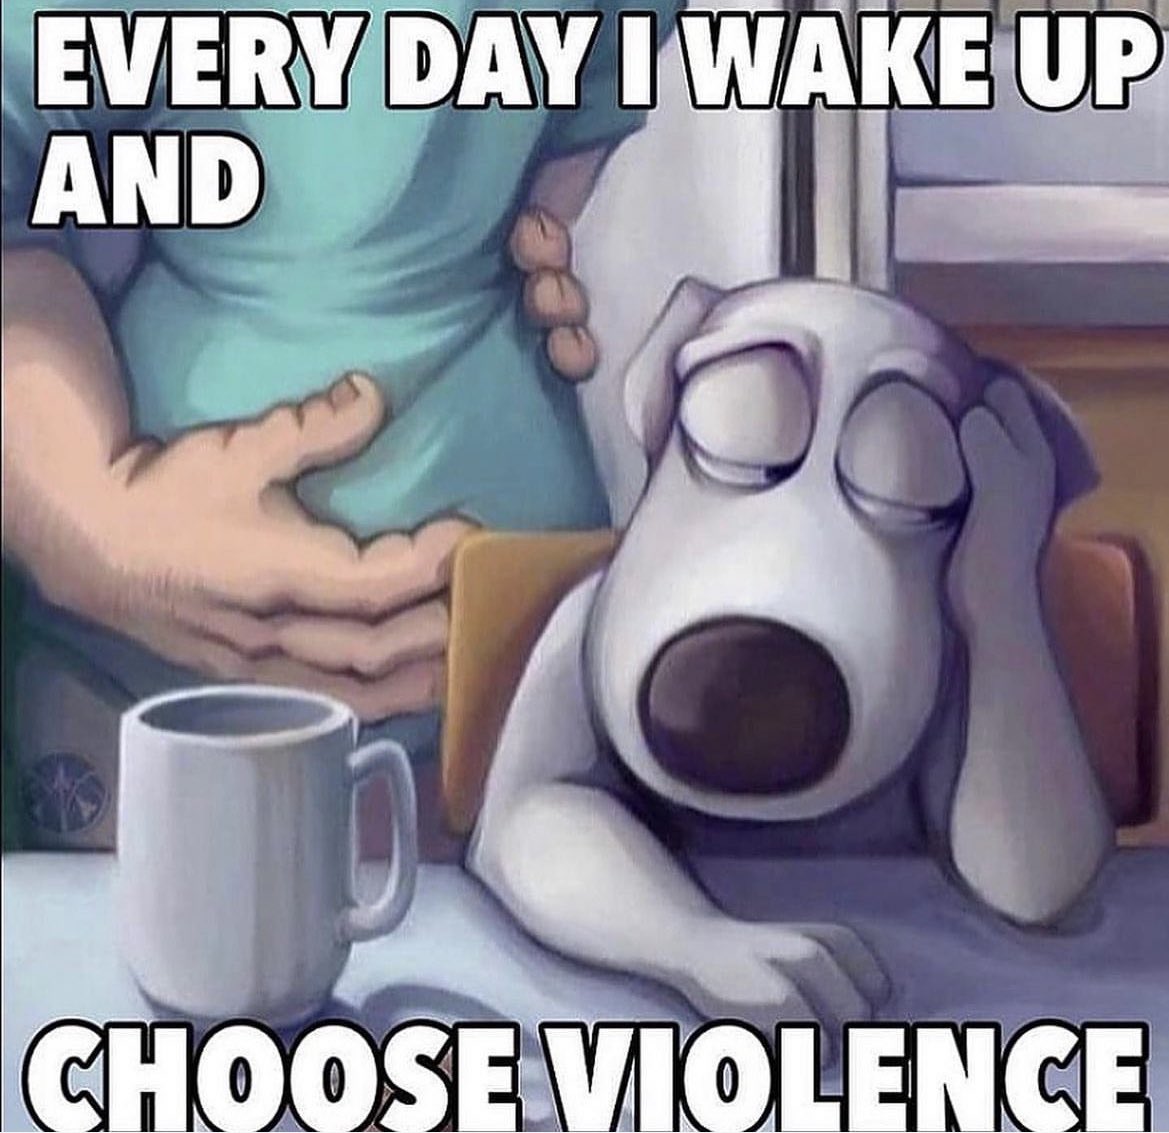 Wake up and choose violence #hater #vibe #comedy #funnyvideos #memes